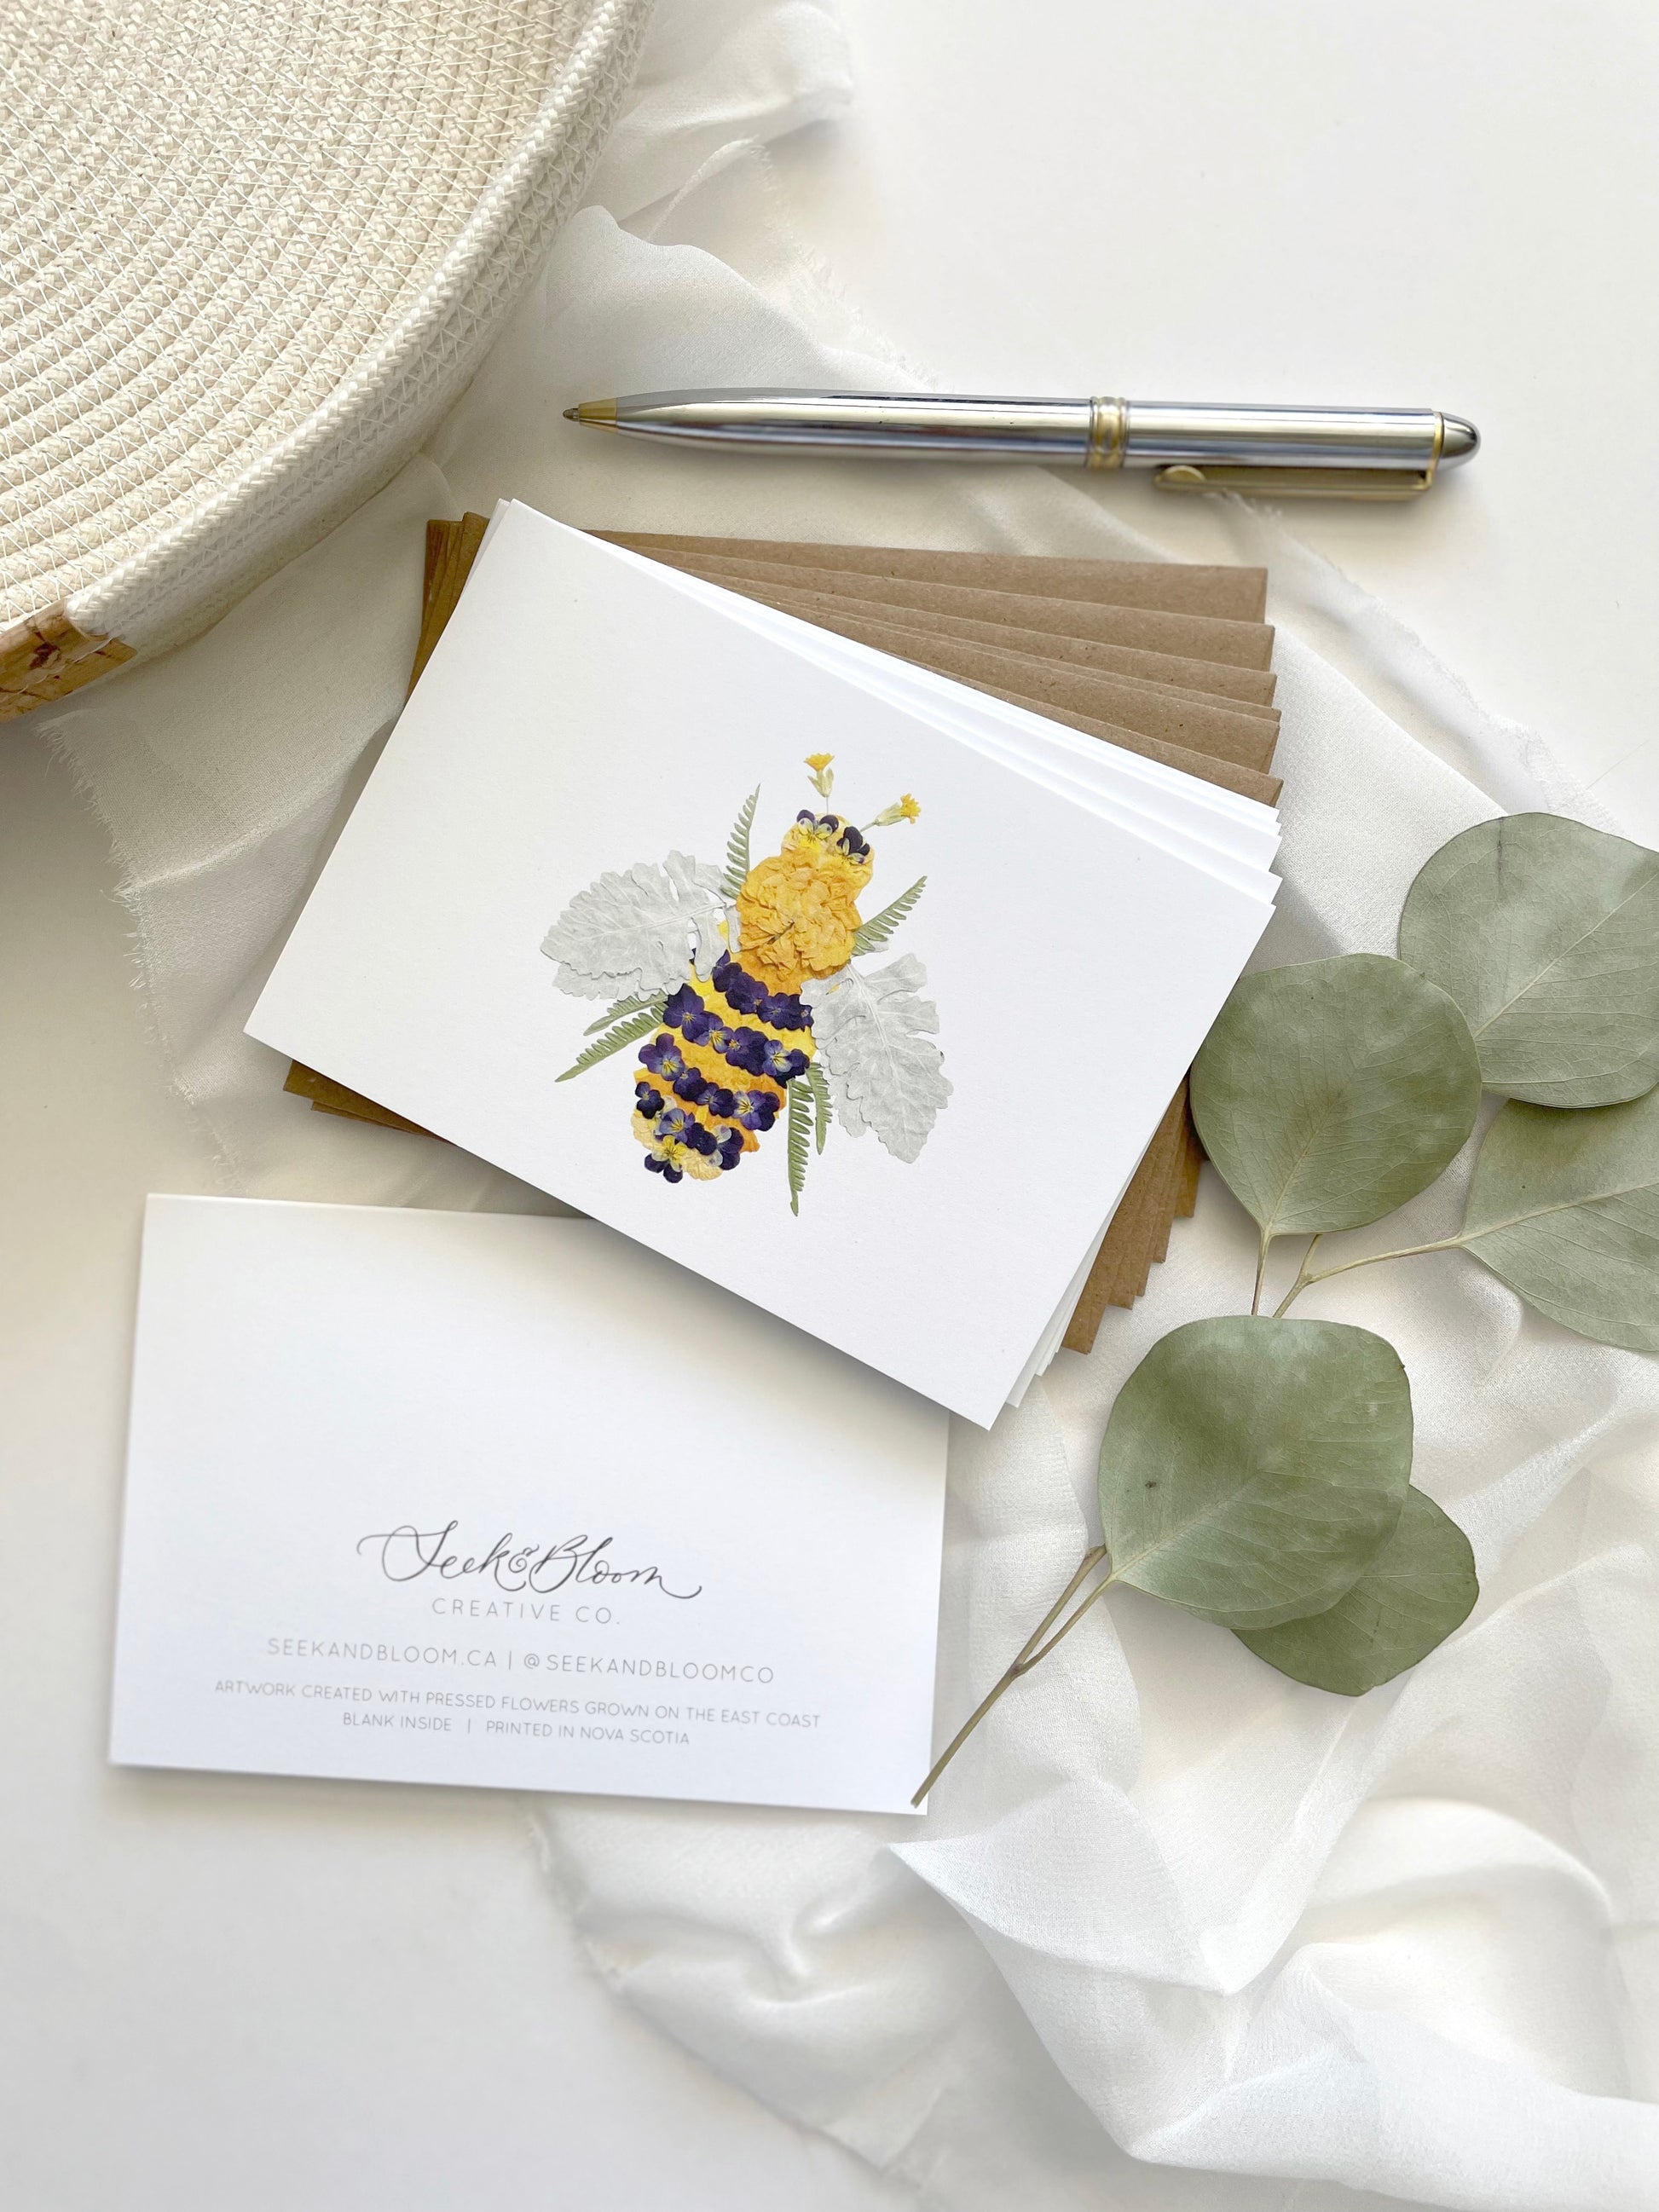 bee themed note card set with artistic bee made from pressed flowers and greenery